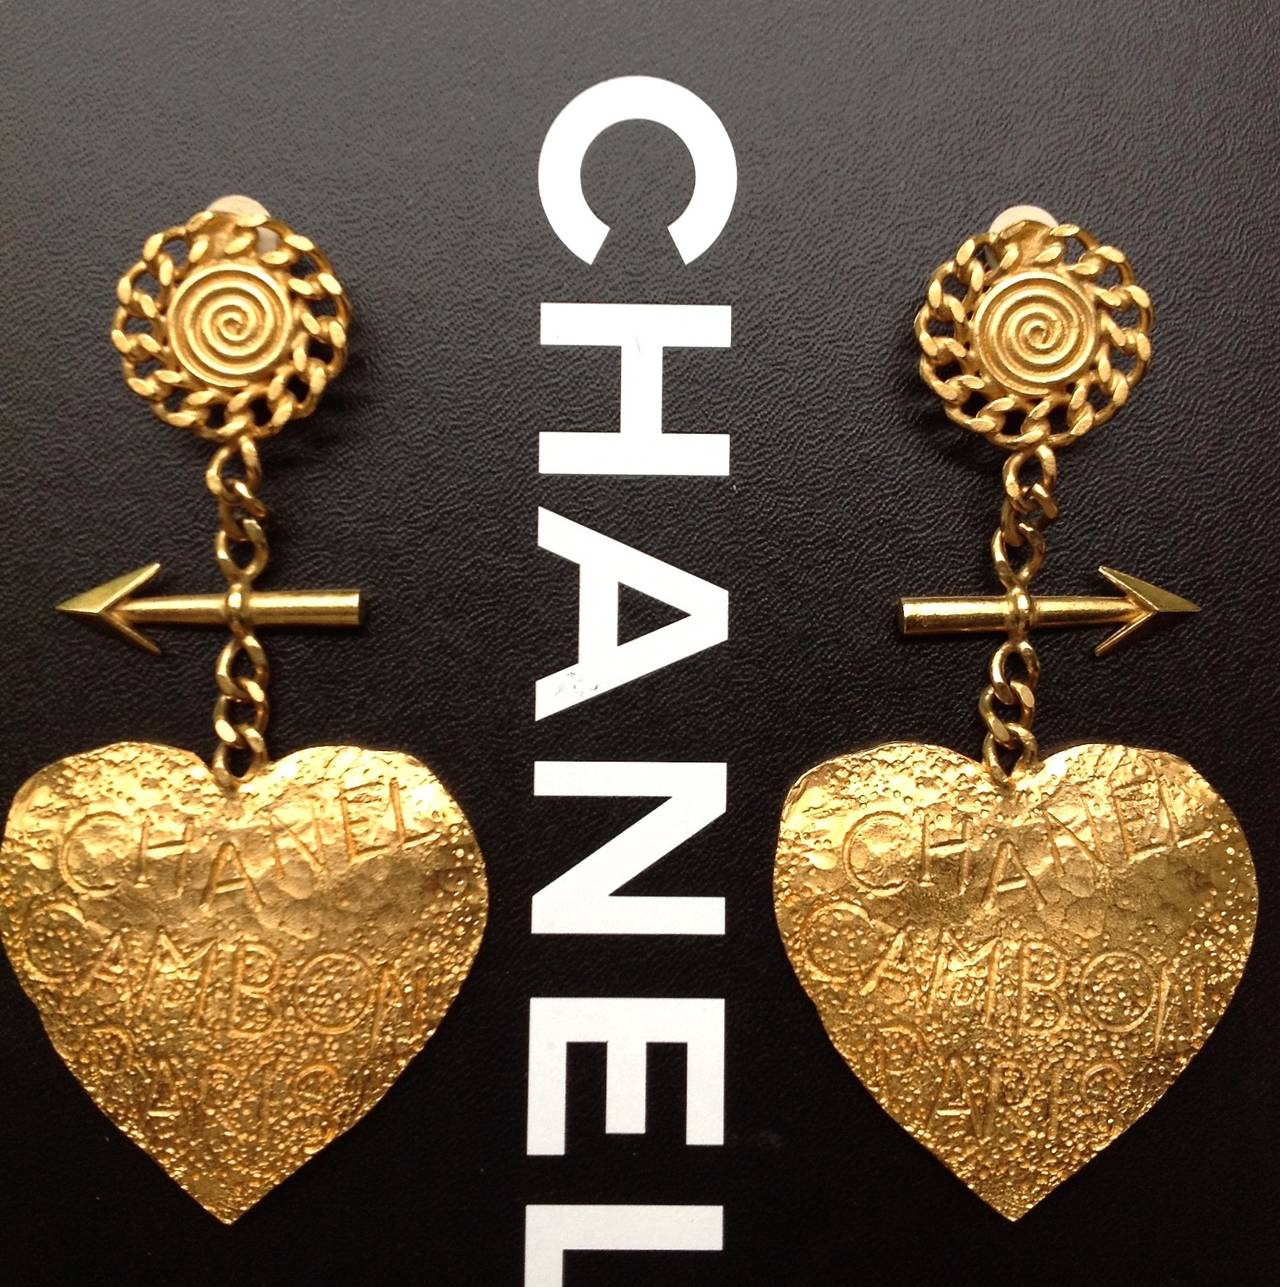 These oversize earrings are super rare and are in the  most  complete and exquisite ones from Chanel  93P arrow heart collection.  
Fully handmade with rich hammering works and fun graffiti on pure gold like gold plating.  
Very precious